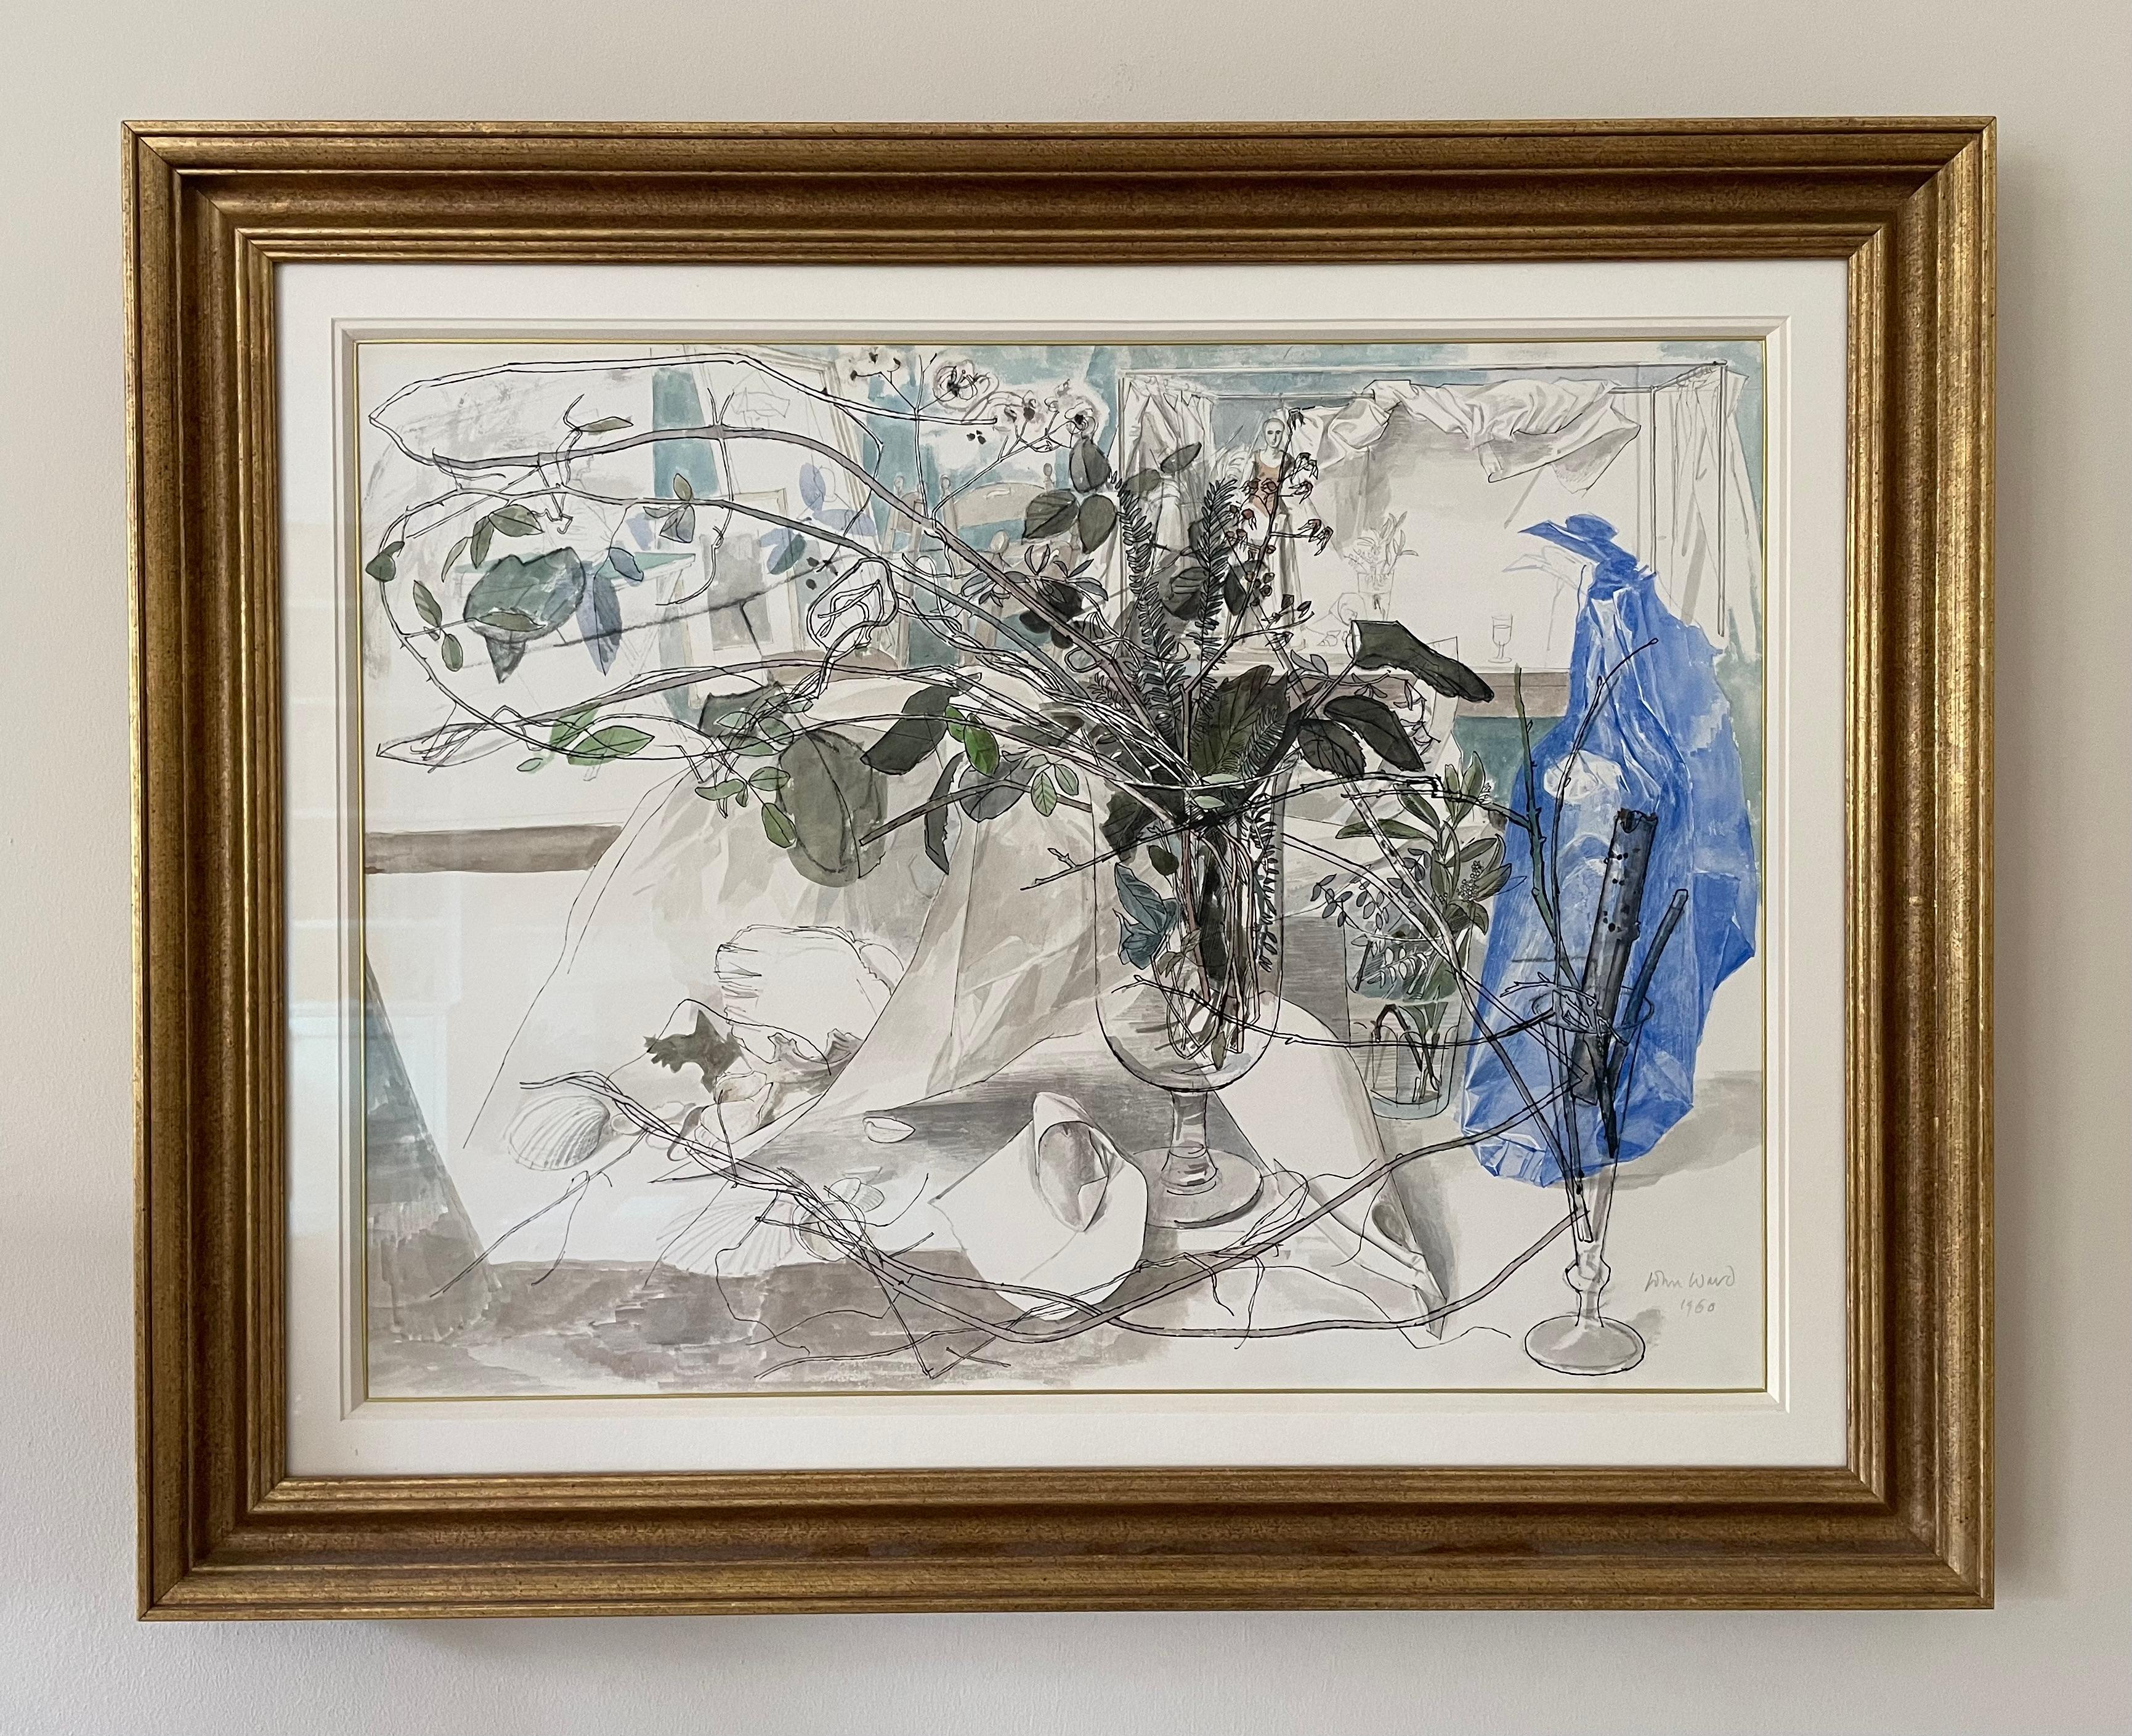 JOHN STANTON WARD, RA, RWS
(1917-2007)

Glasses, Branches and Paper

Signed and dated 1960
Pen and ink, pencil and watercolour

47 by 63 cm., 18 ½ by 24 ¾ in.
(frame size 64.5 by 80.5 cm., 25 ¼ by 31 ¾ in.)

Provenance:
Private collection since